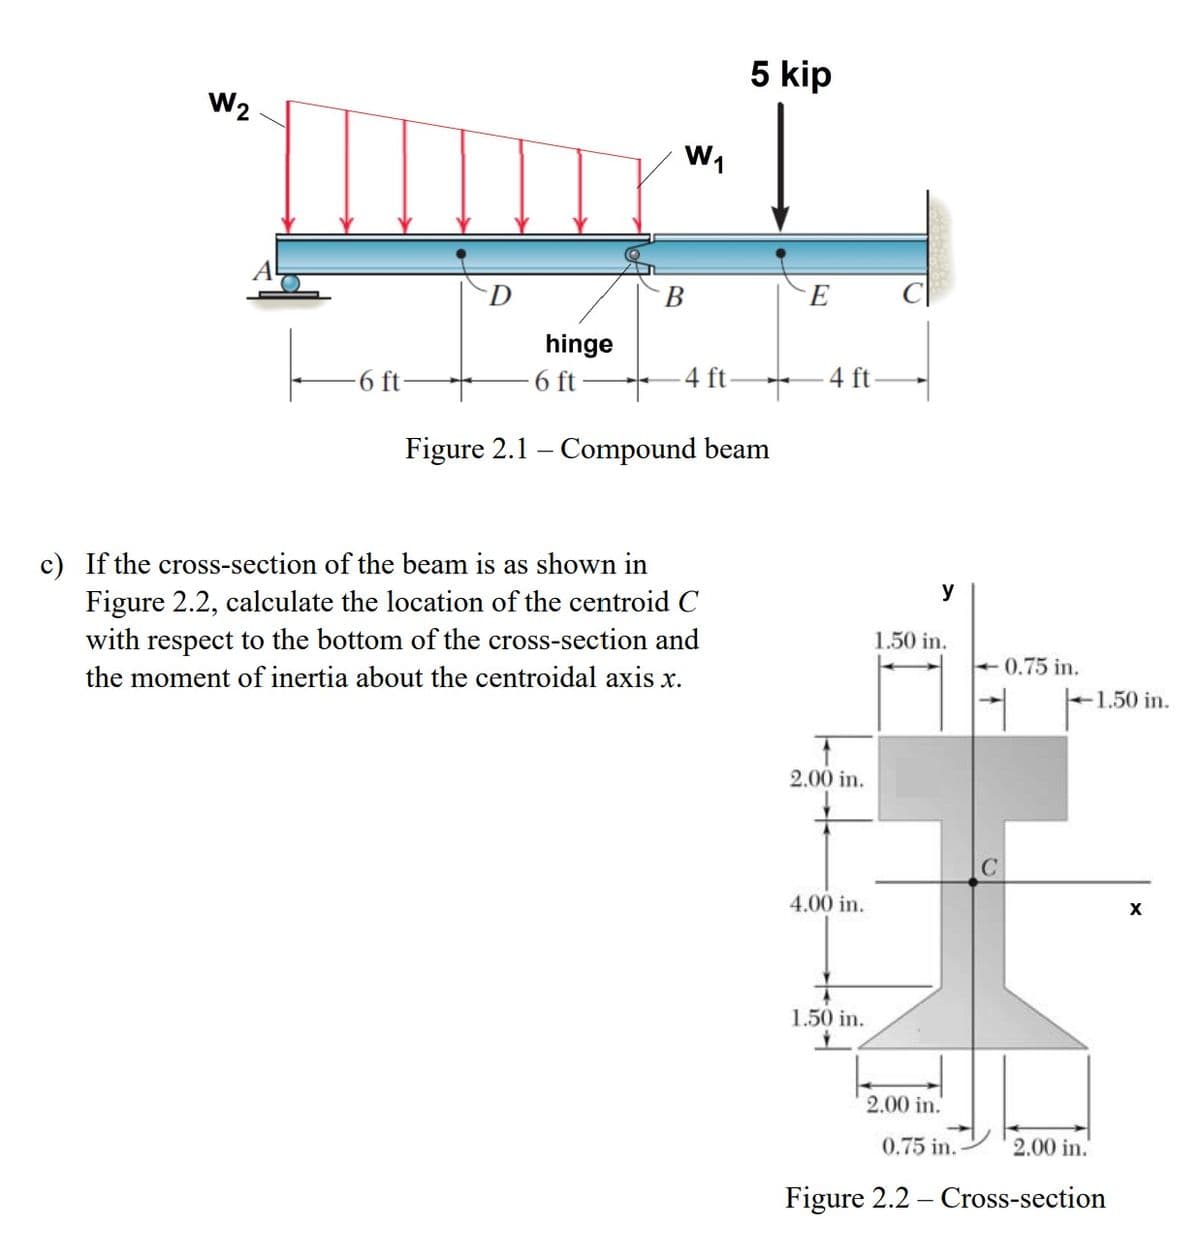 W2
-6 ft-
hinge
6 ft
W₁
B
-4 ft
5 kip
Figure 2.1 - Compound beam
c) If the cross-section of the beam is as shown in
Figure 2.2, calculate the location of the centroid C
with respect to the bottom of the cross-section and
the moment of inertia about the centroidal axis x.
E
4 ft-
2.00 in.
4.00 in.
1.50 in.
C
y
1.50 in.
2.00 in.
0.75 in.
-1.50 in.
0.75 in.
2.00 in.
Figure 2.2 Cross-section
X